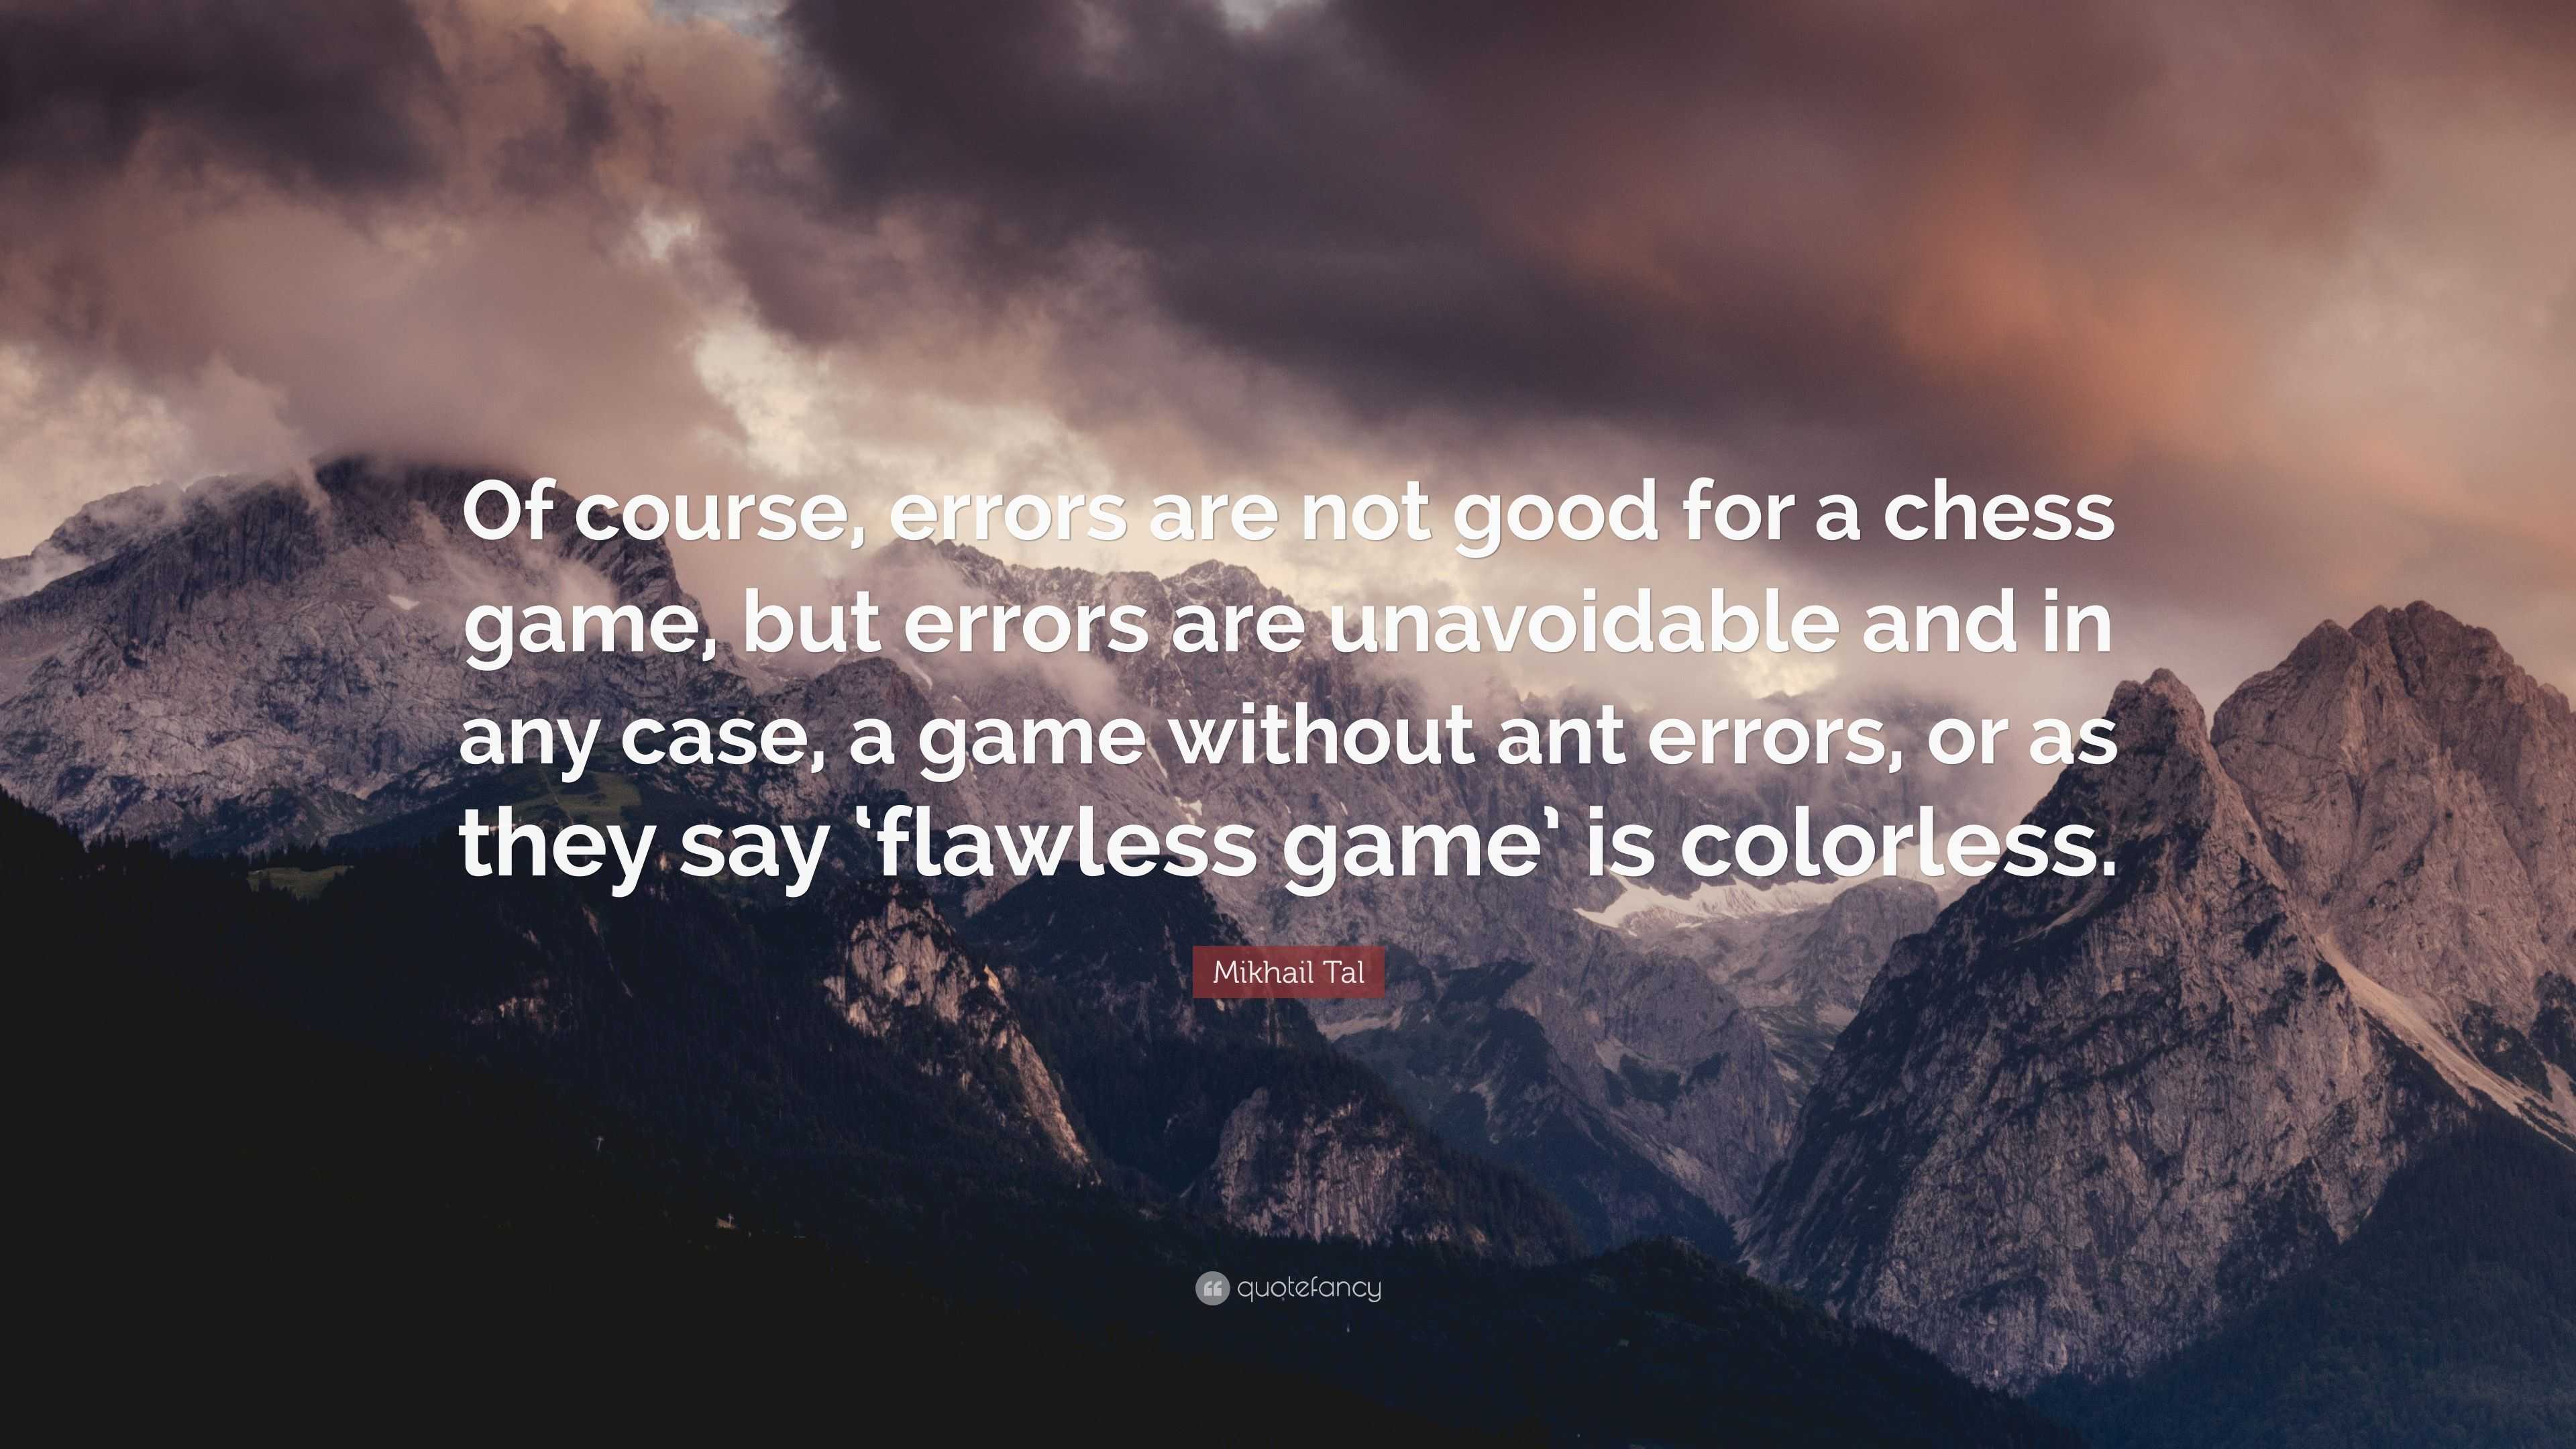 ChessMood - Tal quotes are simple but at the same time